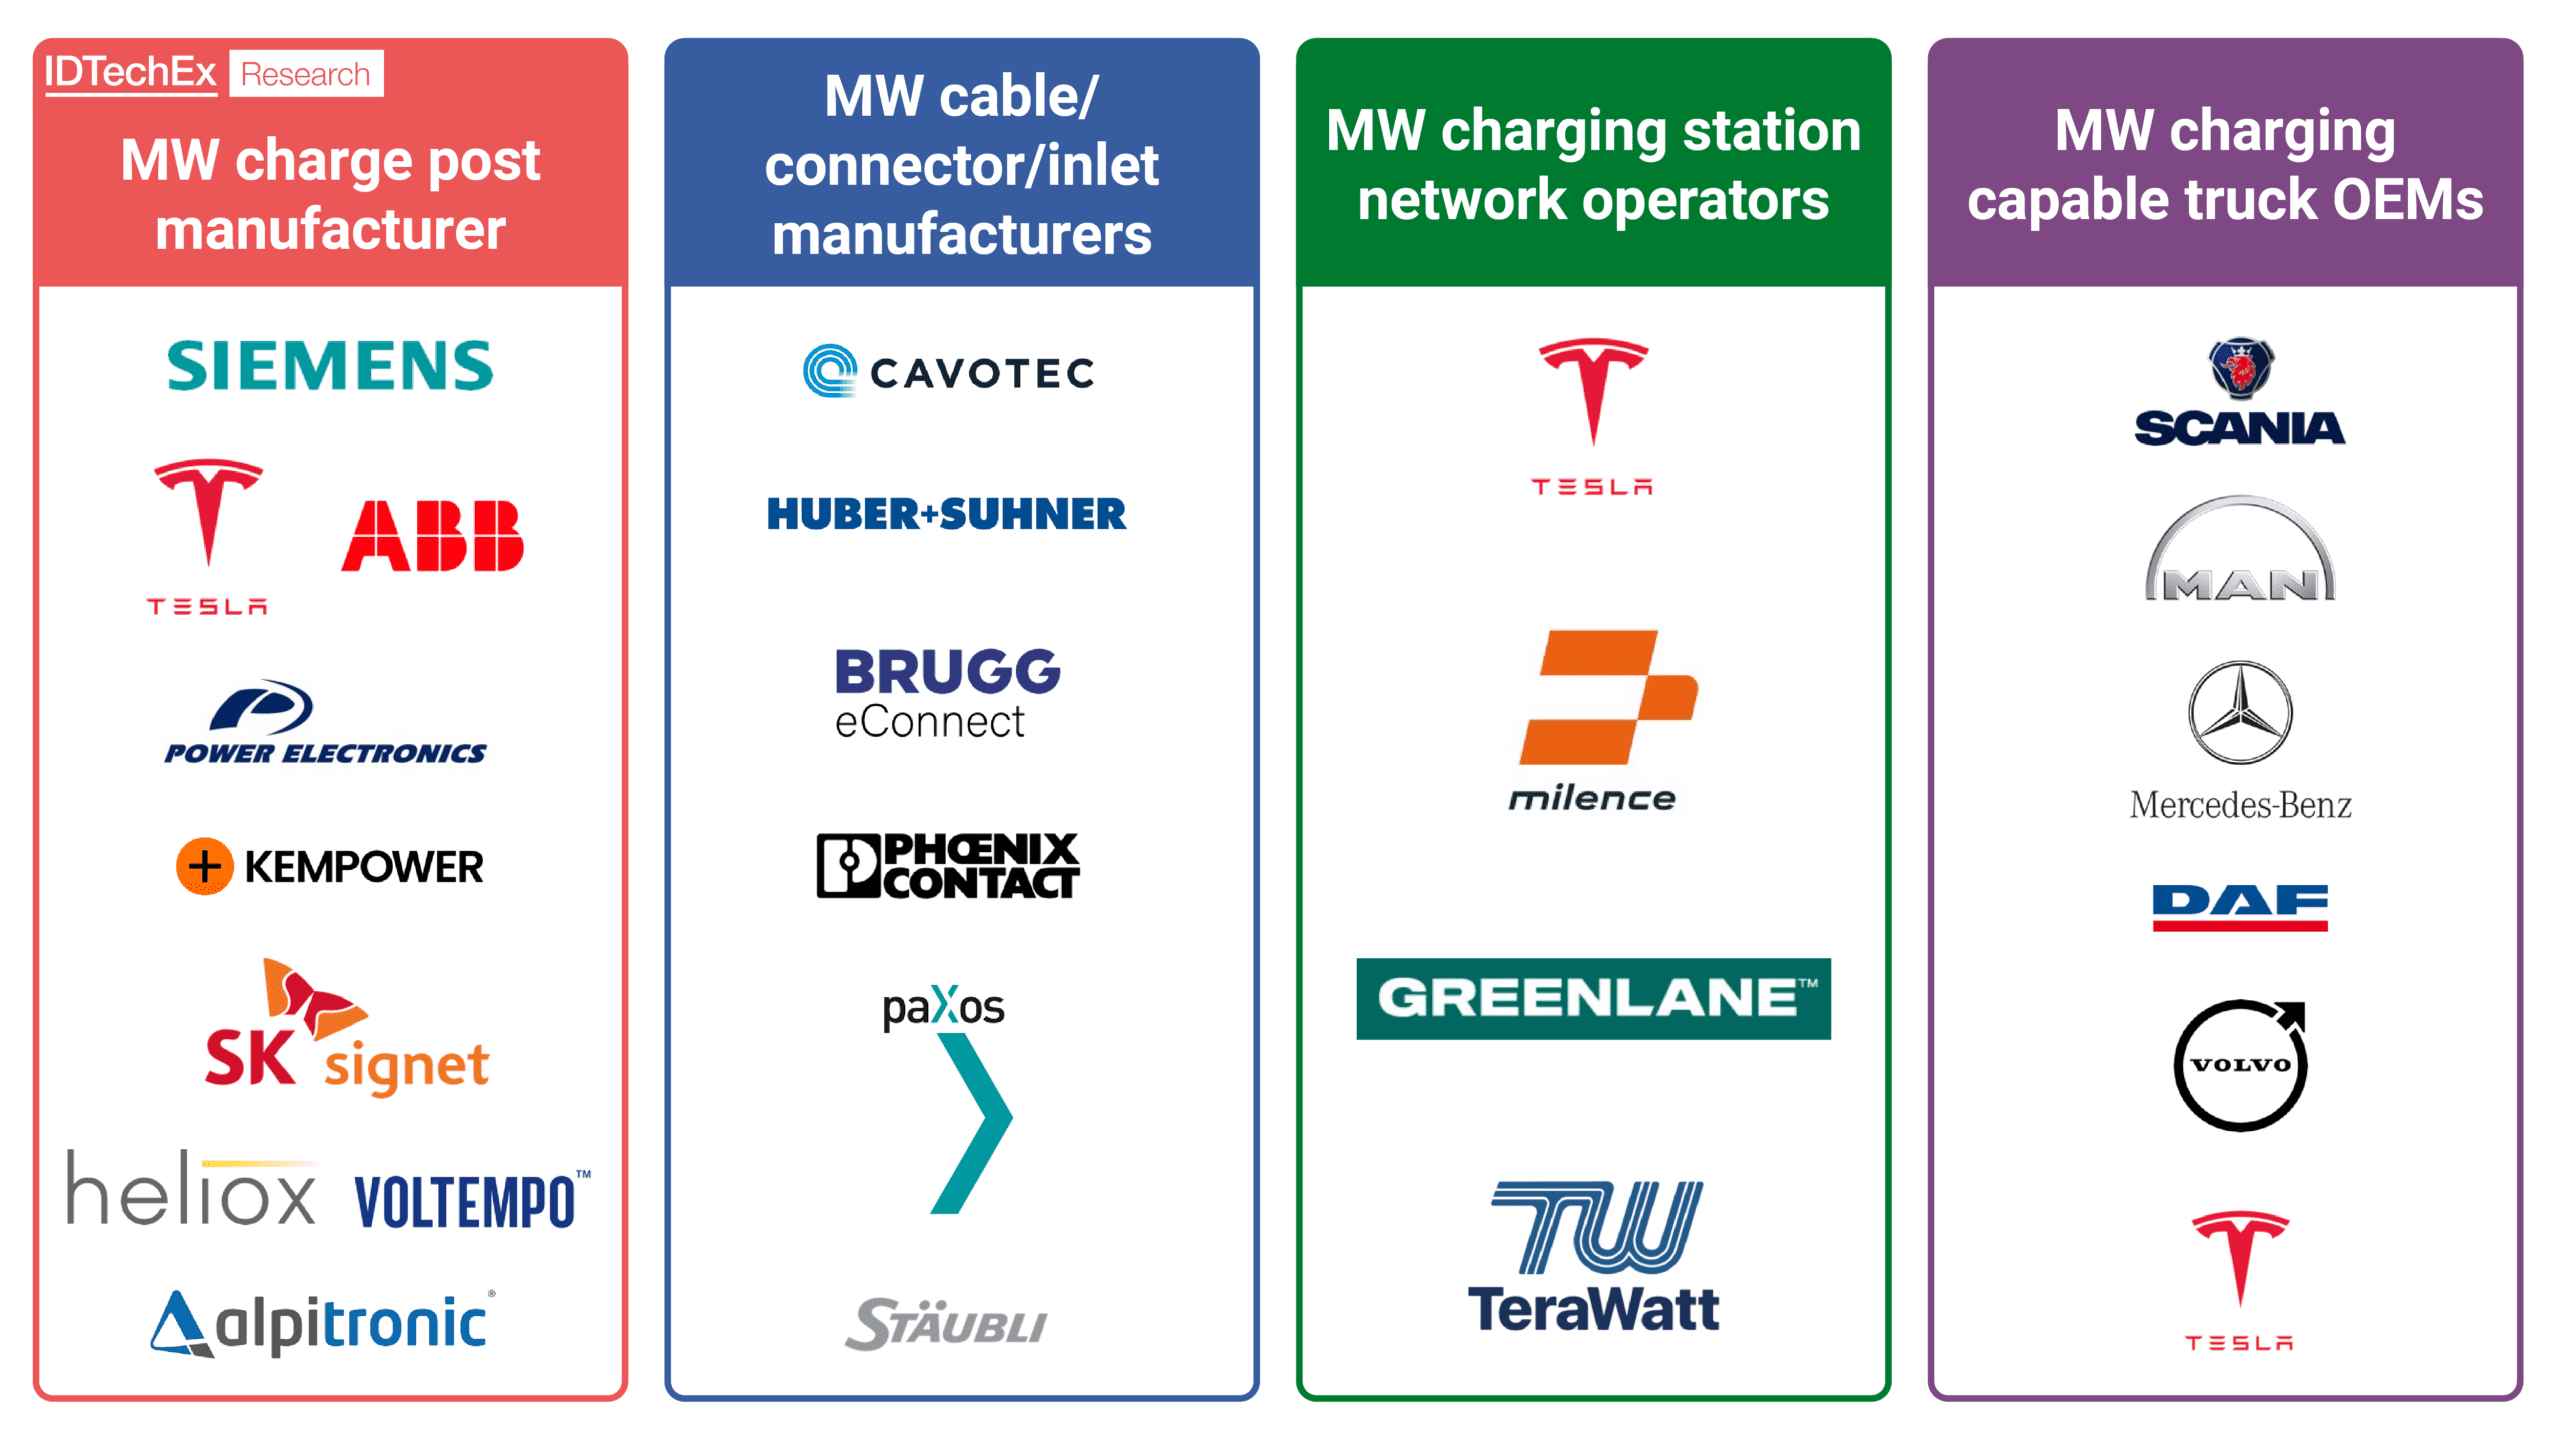 MW-charge-post-manufacturer